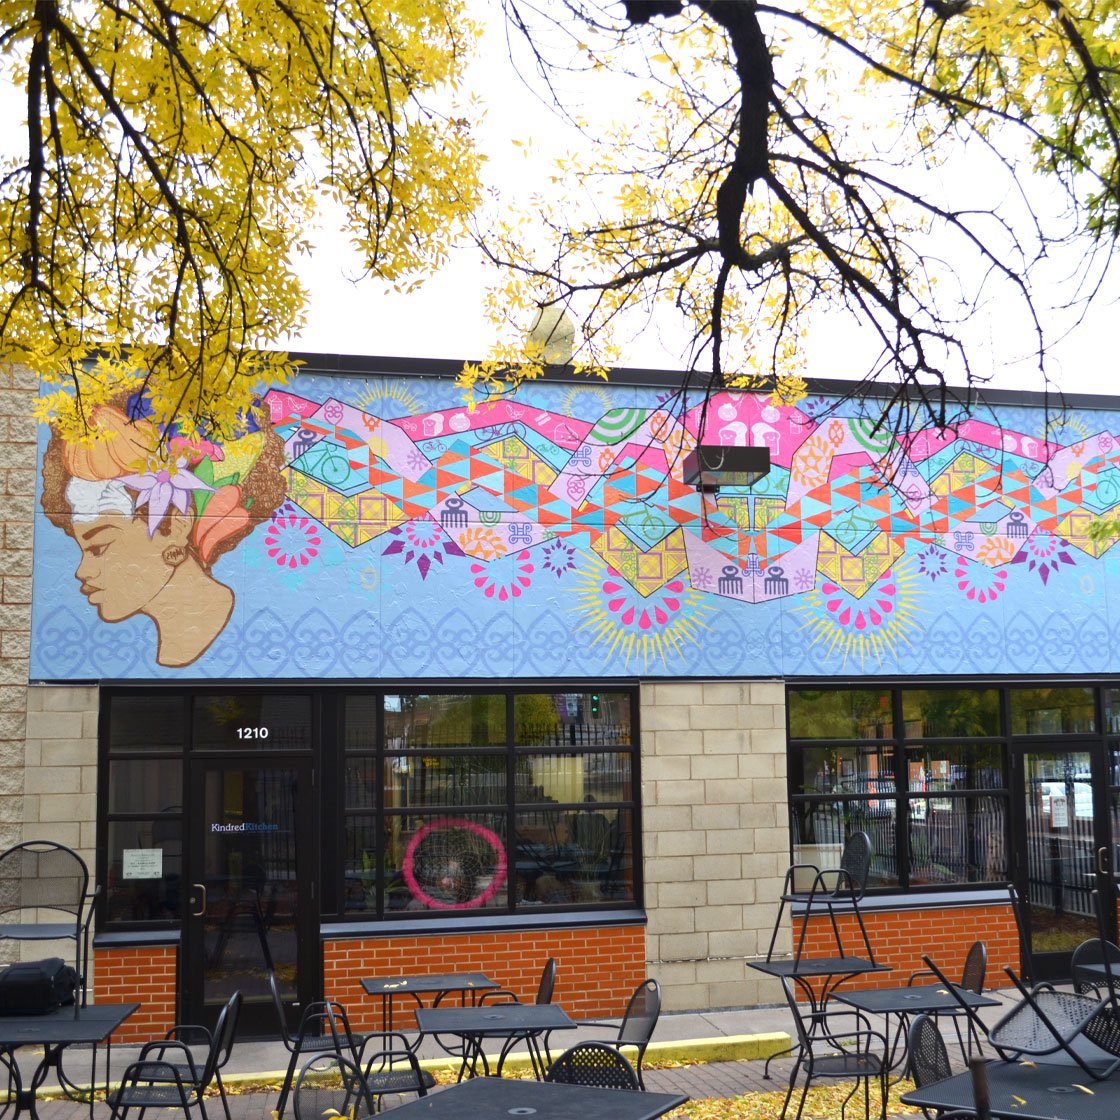 A restaurant patio decorated by a large-scale colorful mural of a woman with long flowing colorful hair